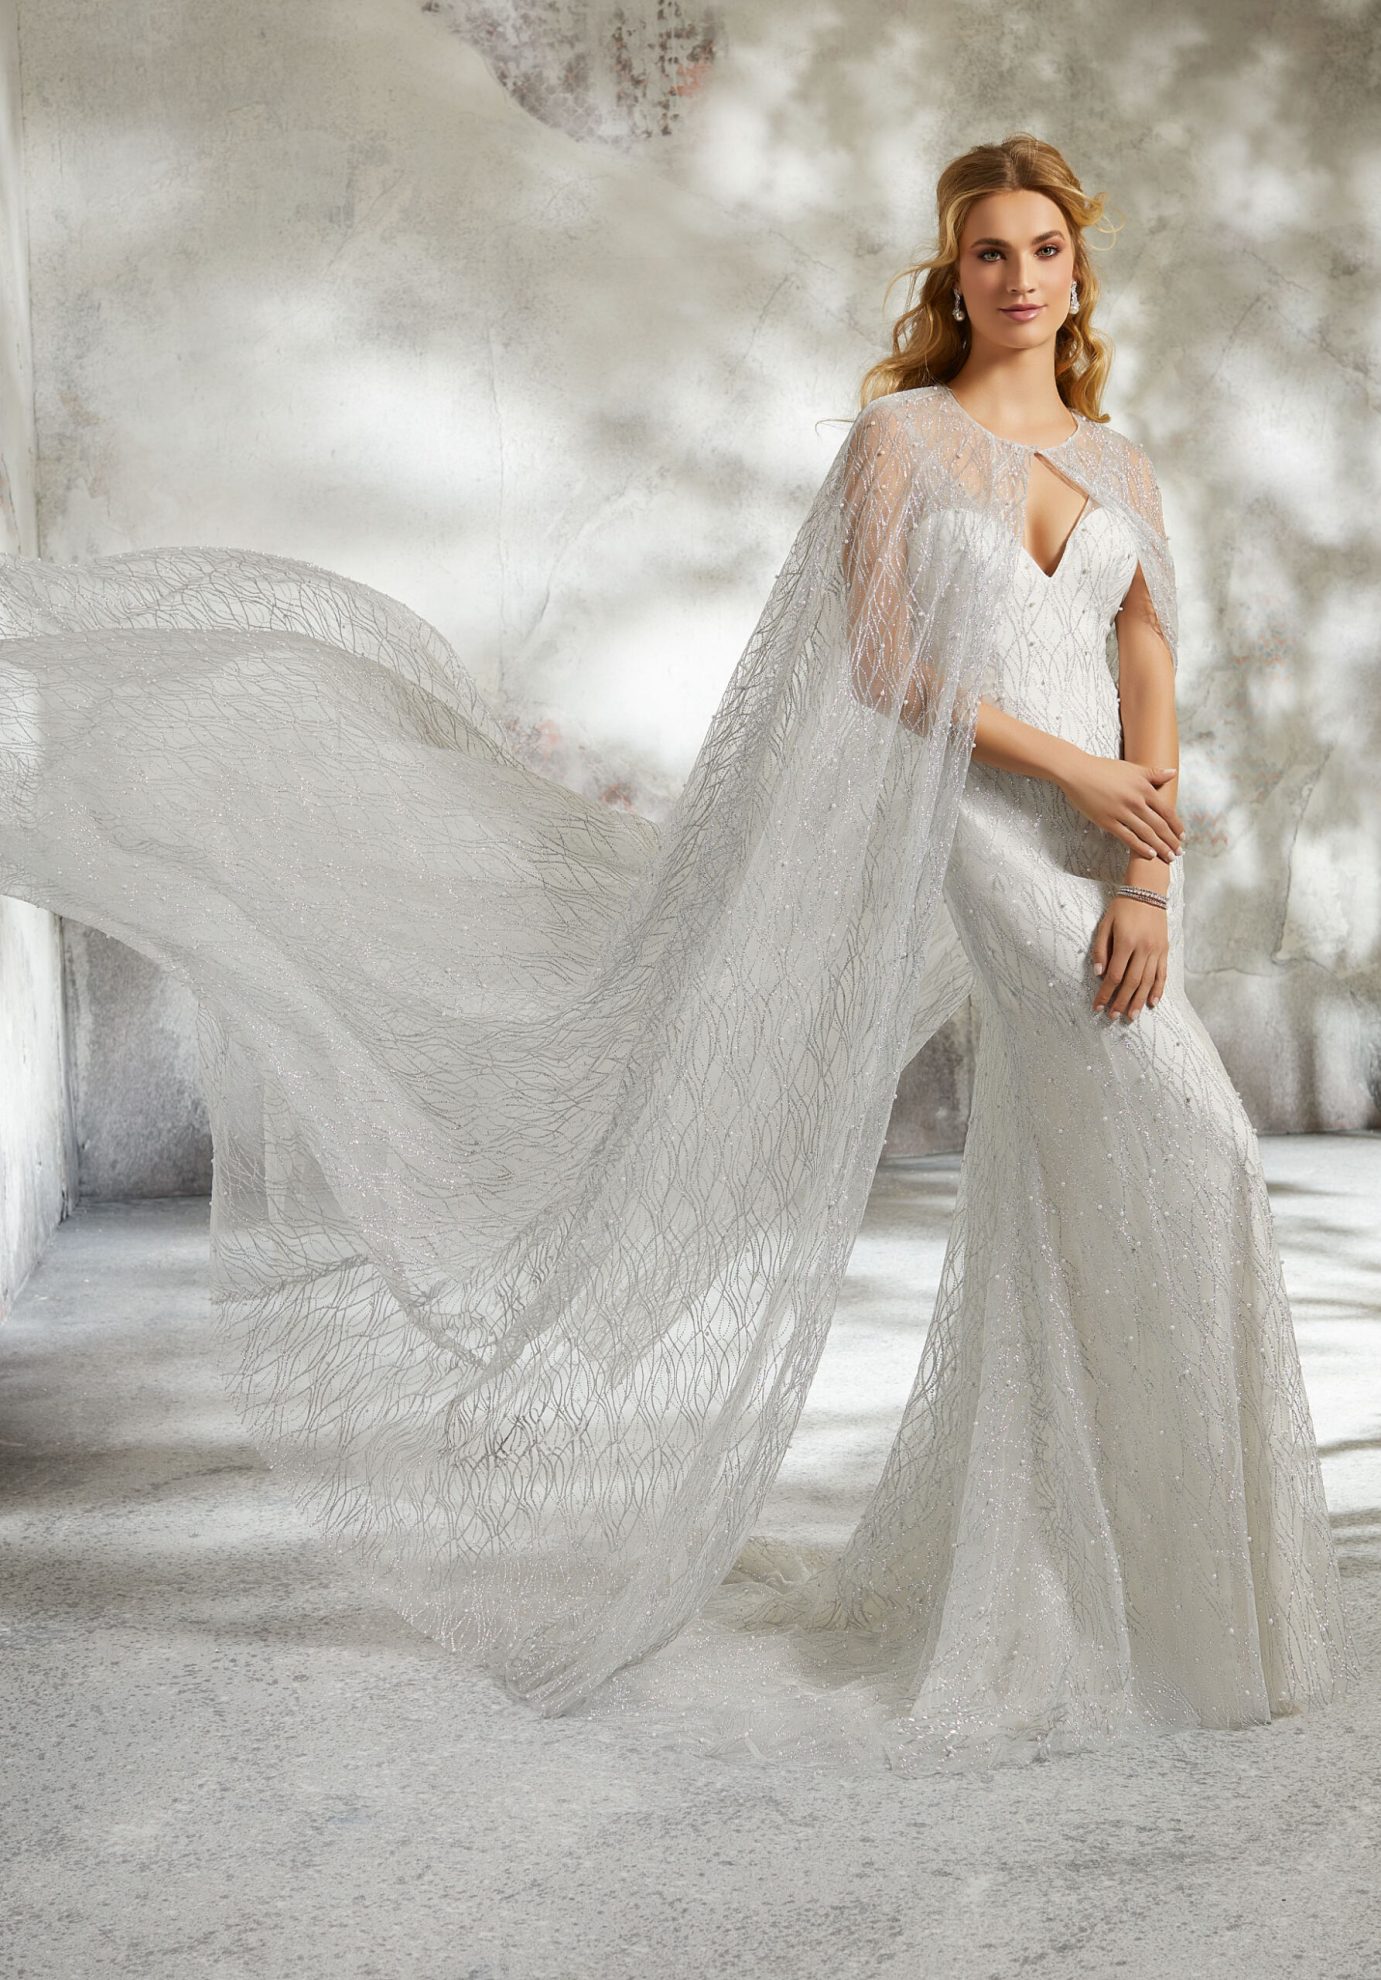 This image shows a beautiful bride in her wedding dress with a Morilee cape as a bridal cover-up.